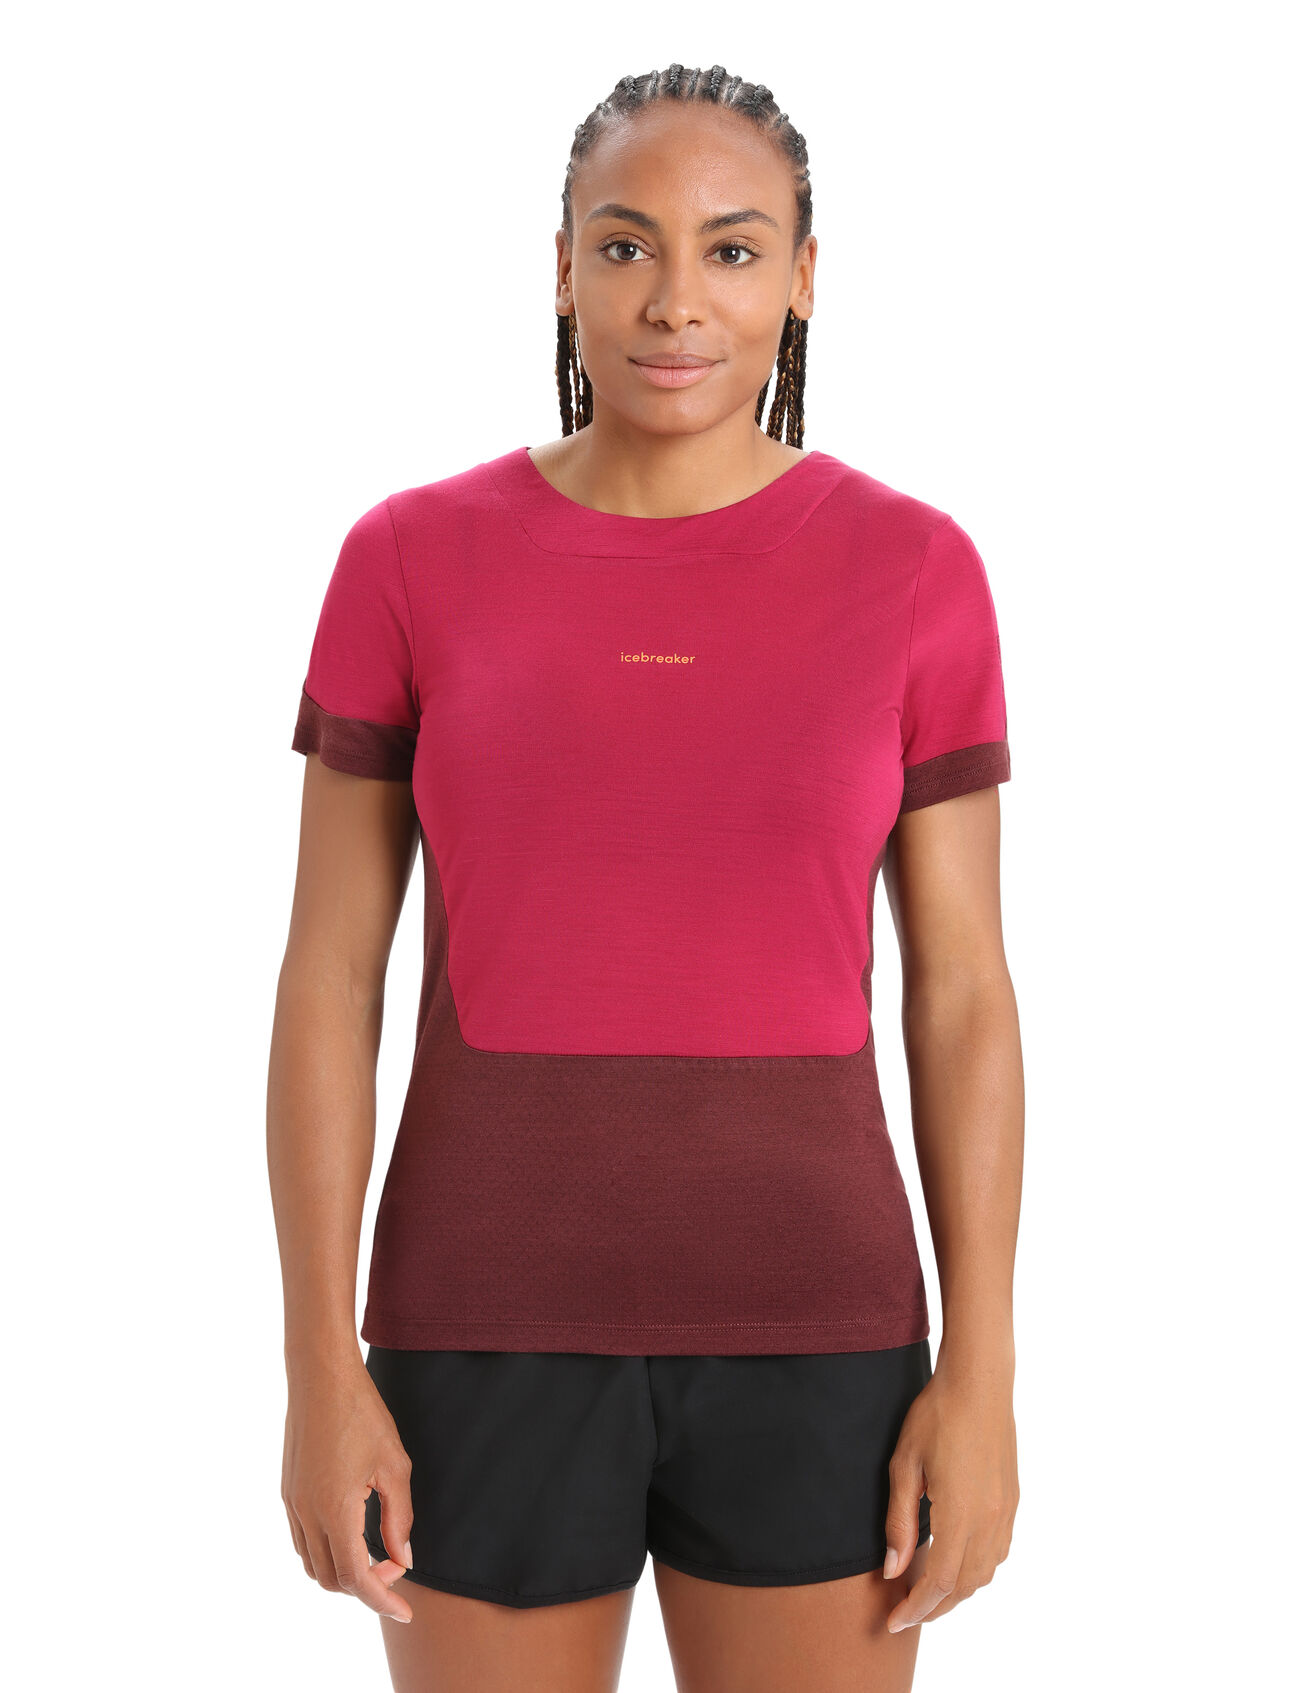 Womens ZoneKnit™ Merino Short Sleeve Slit Back Tee Our most breathable and lightweight tee designed for maximum breathability during high-output activities, the ZoneKnit™ Short Sleeve Slit Back Tee combines Cool-Lite™ jersey fabric with our ZoneKnit™ body-mapped ventilation.